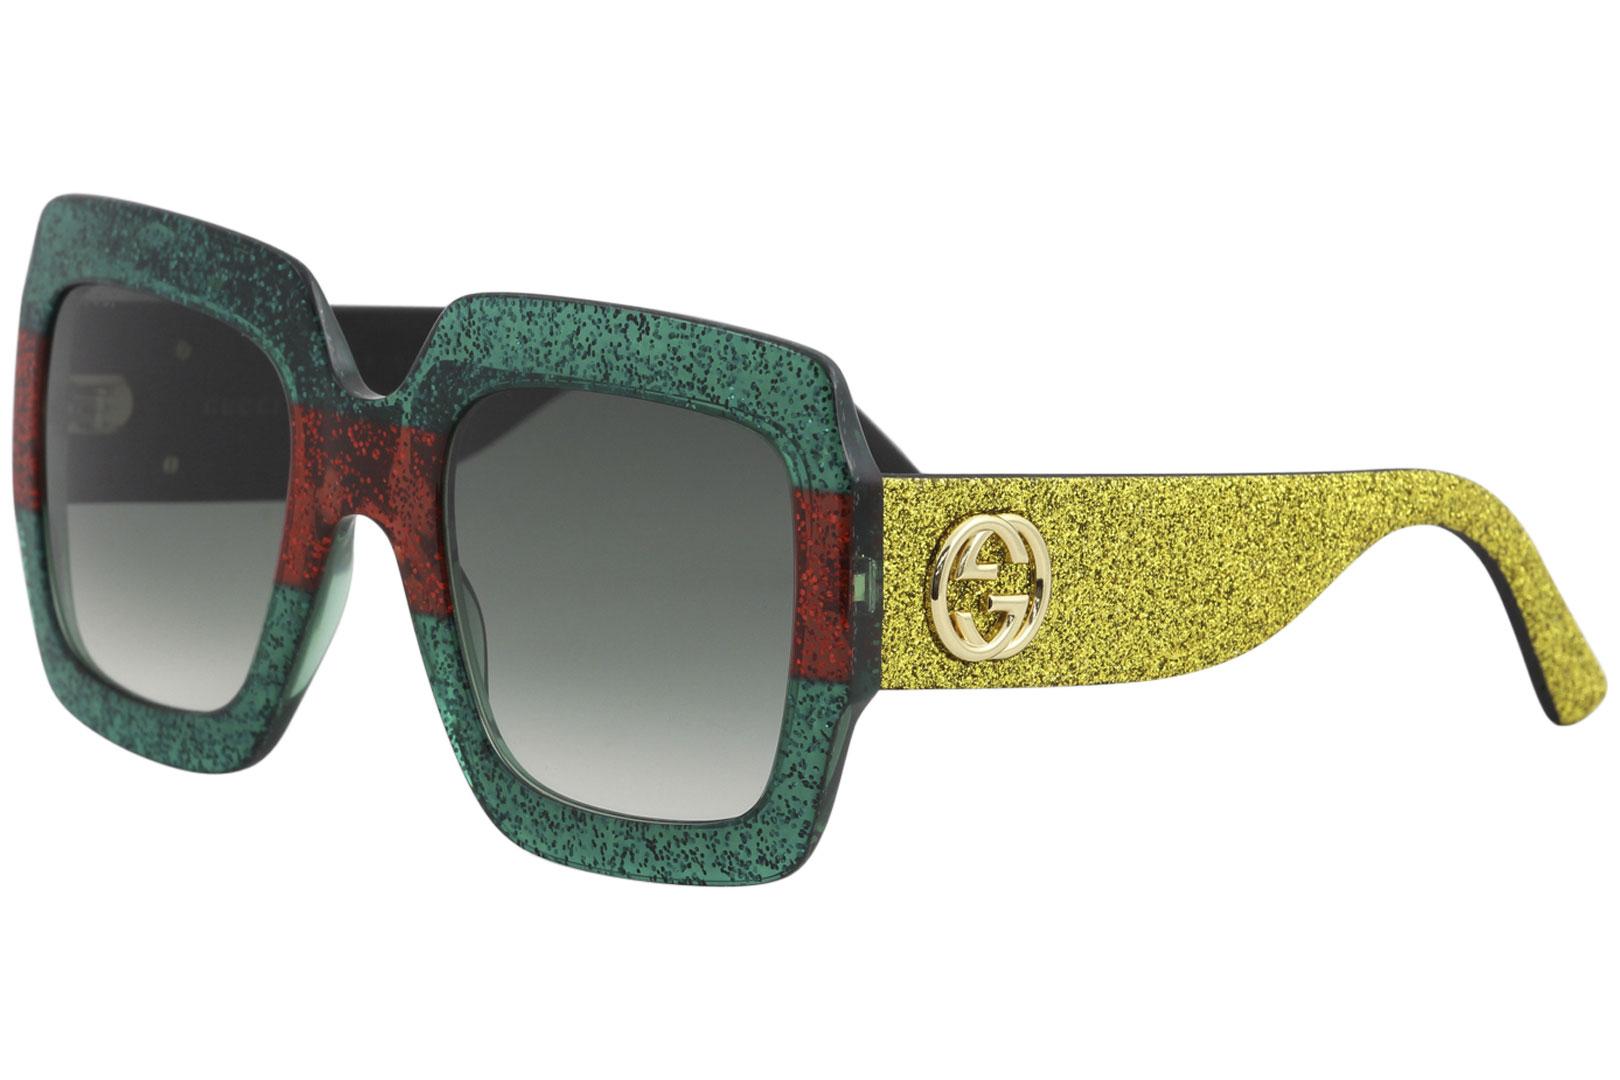 Gucci Women's Urban Collection GG0102S GG/0102/S Sunglasses - Green Red Gold/Green Gradient   006 -  Lens 54 Bridge 25 Temple 145mm